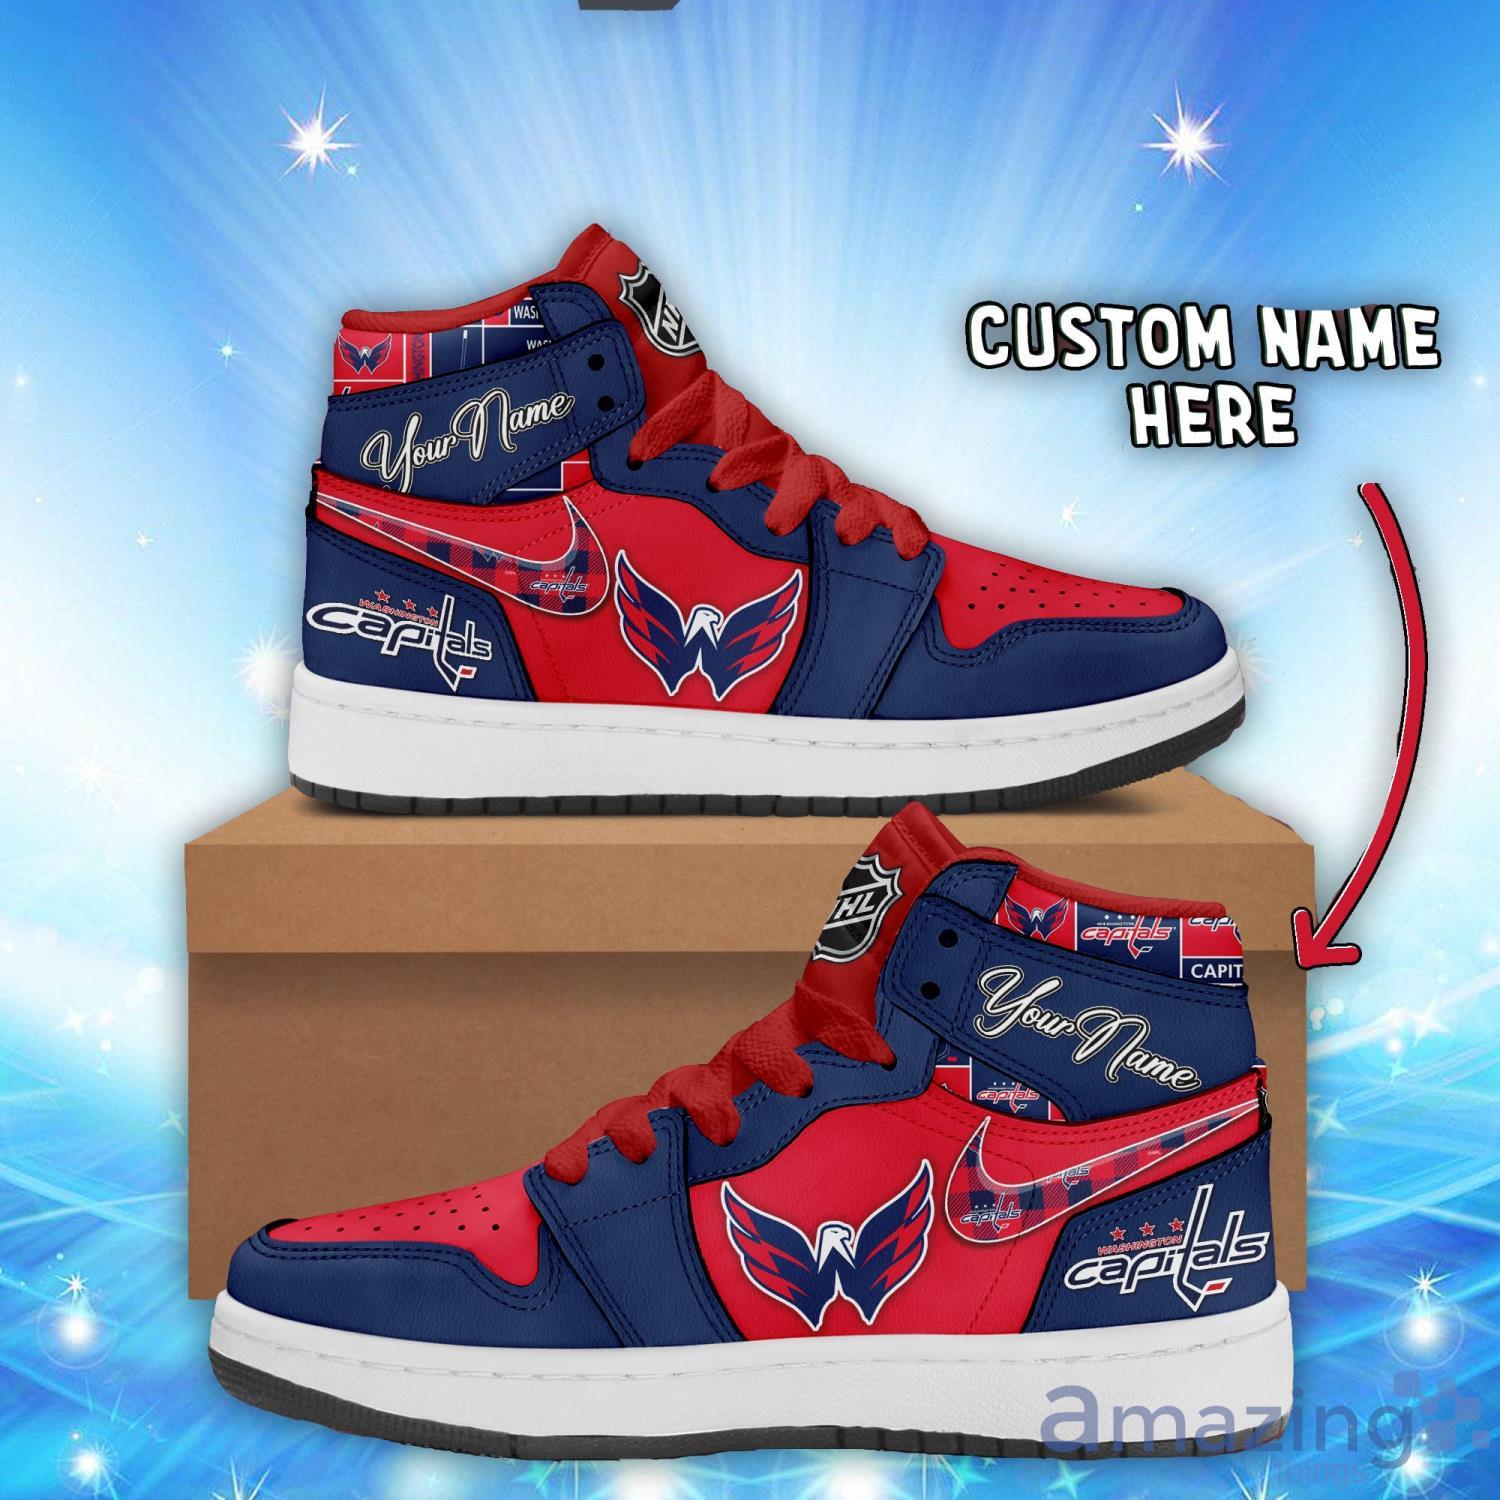 Personalized Name Sneakers Washington Capitals Air Jordan Hightop Shoes Men And Women Gift Product Photo 1